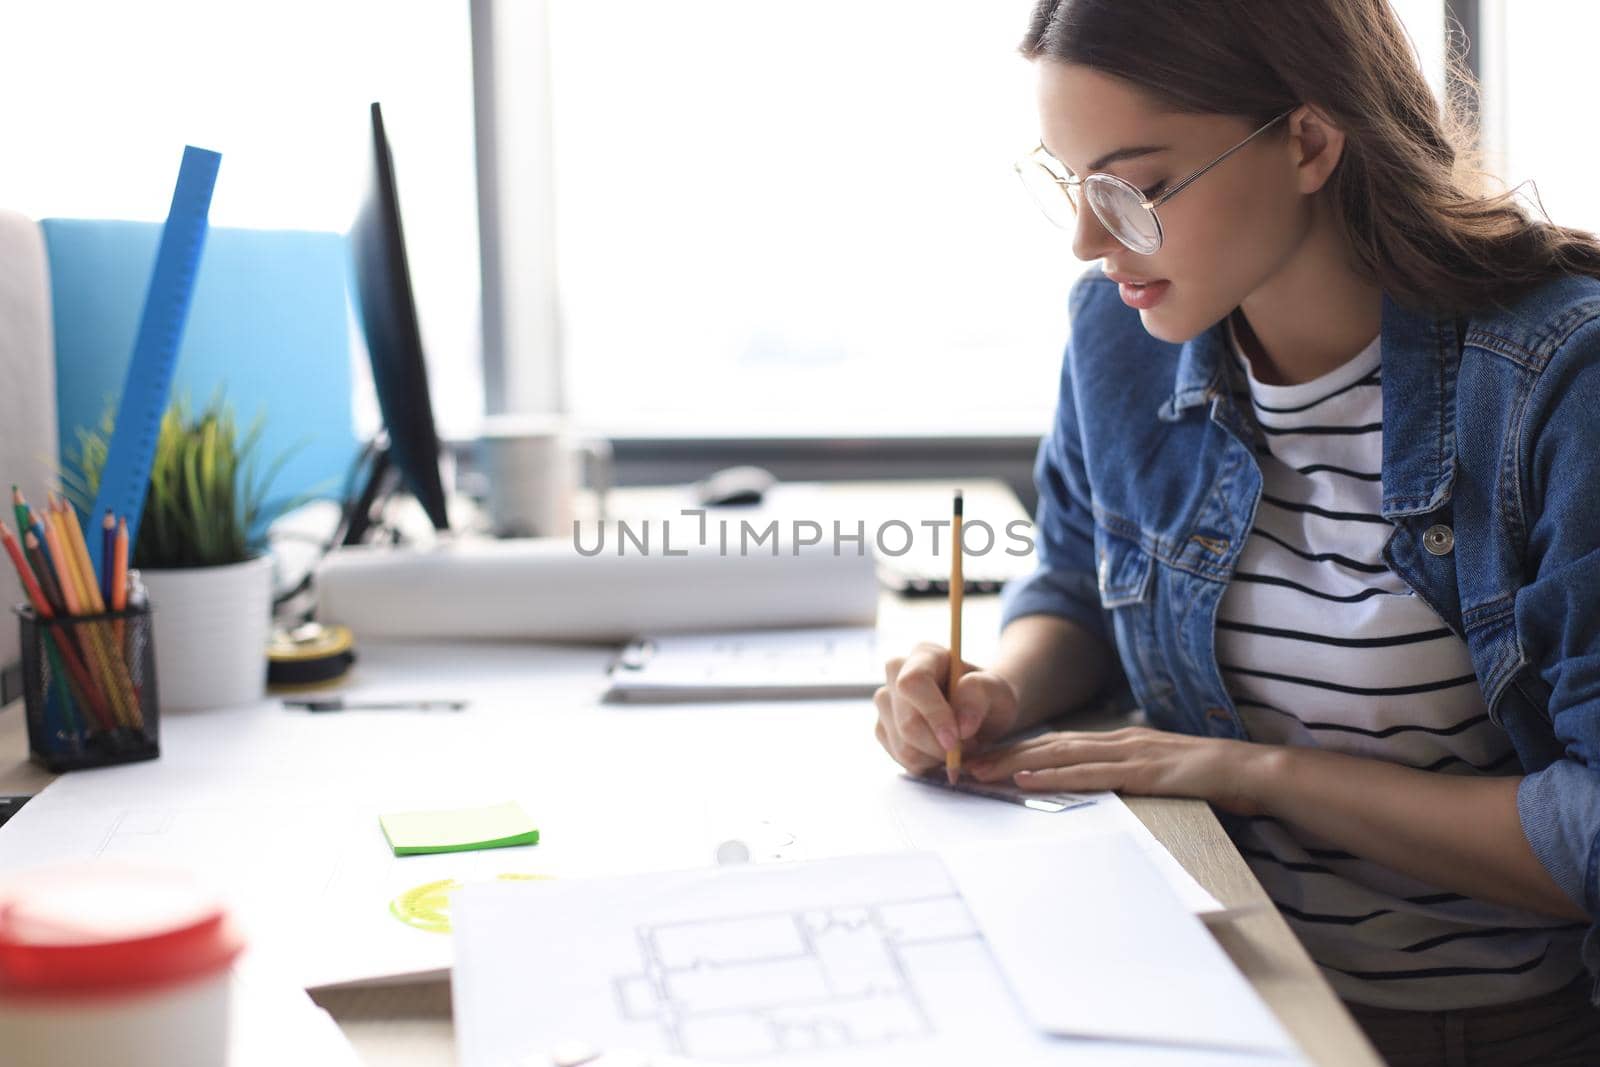 Concentrated young woman writing something down while working in the office